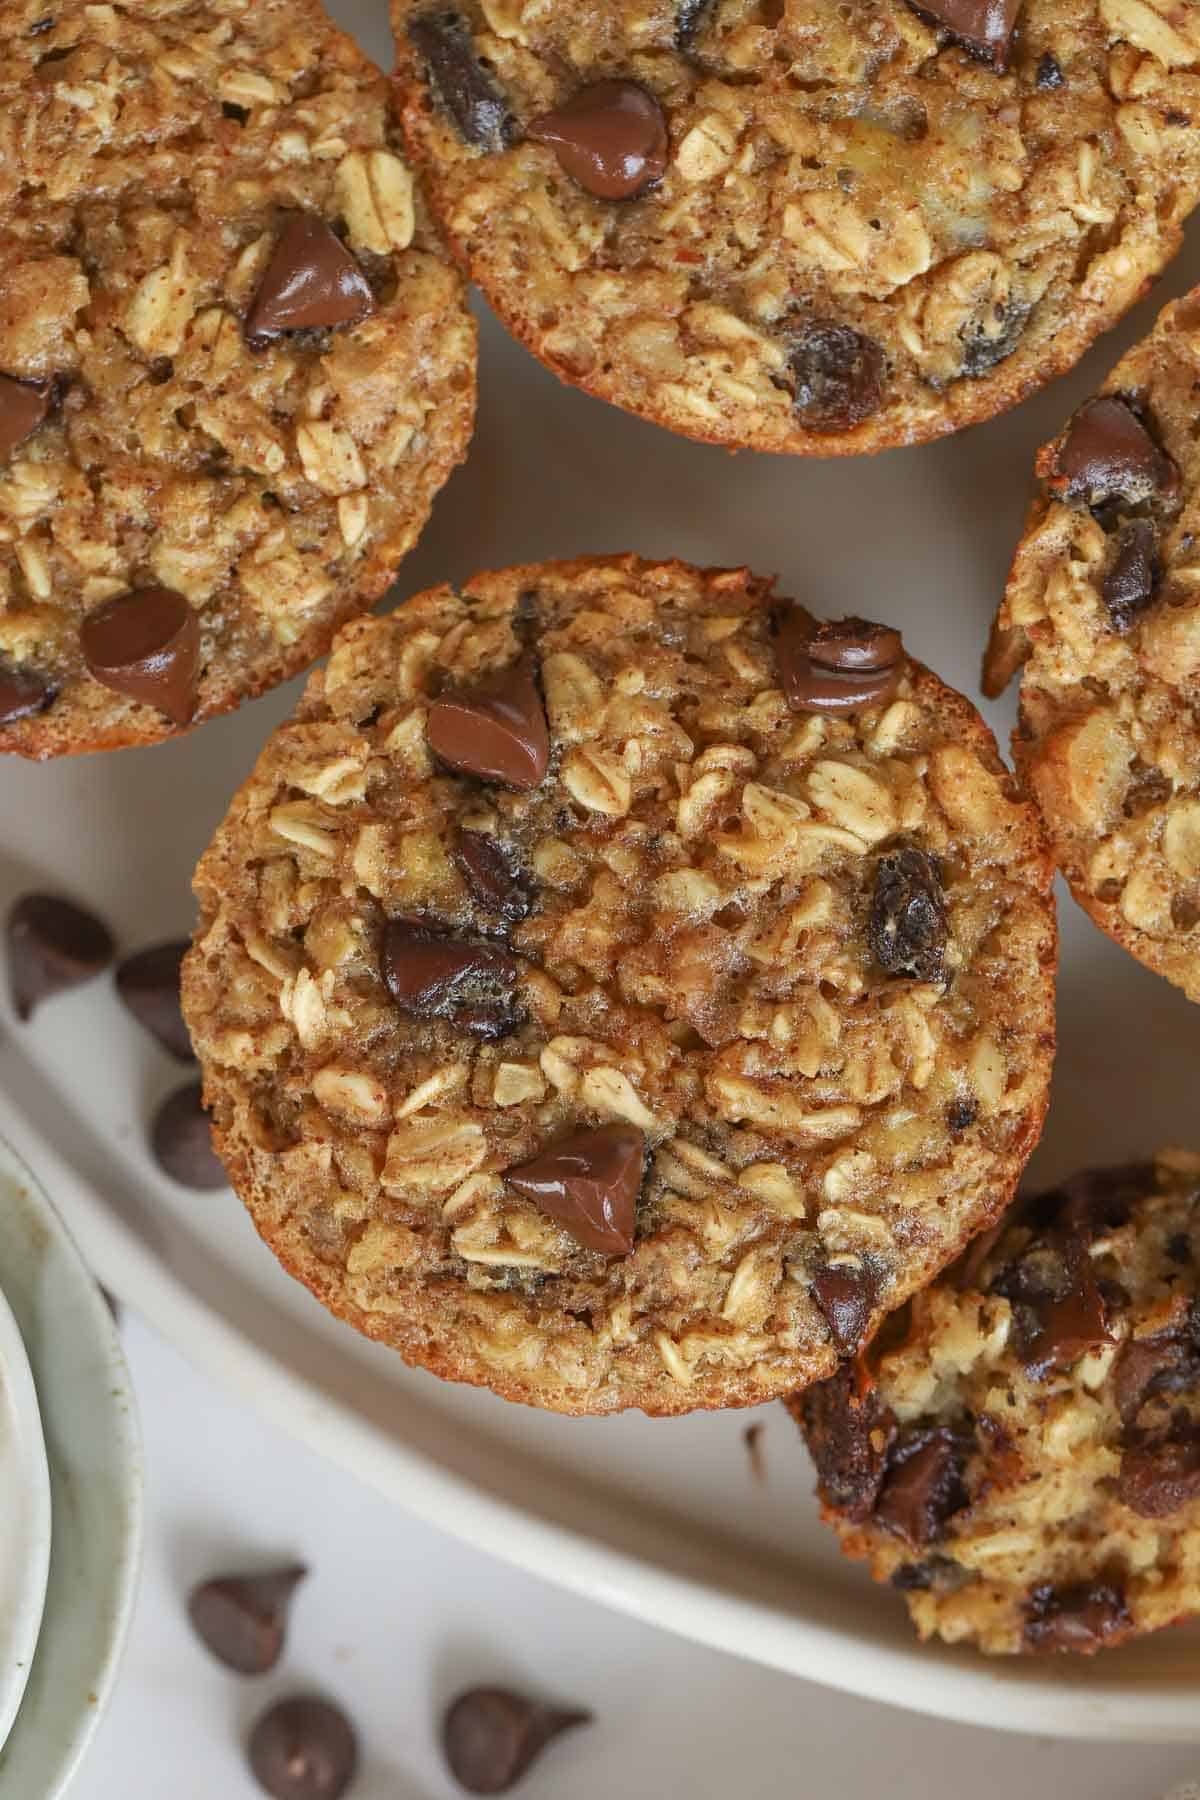 Baked oatmeal cup with raisins and chocolate.